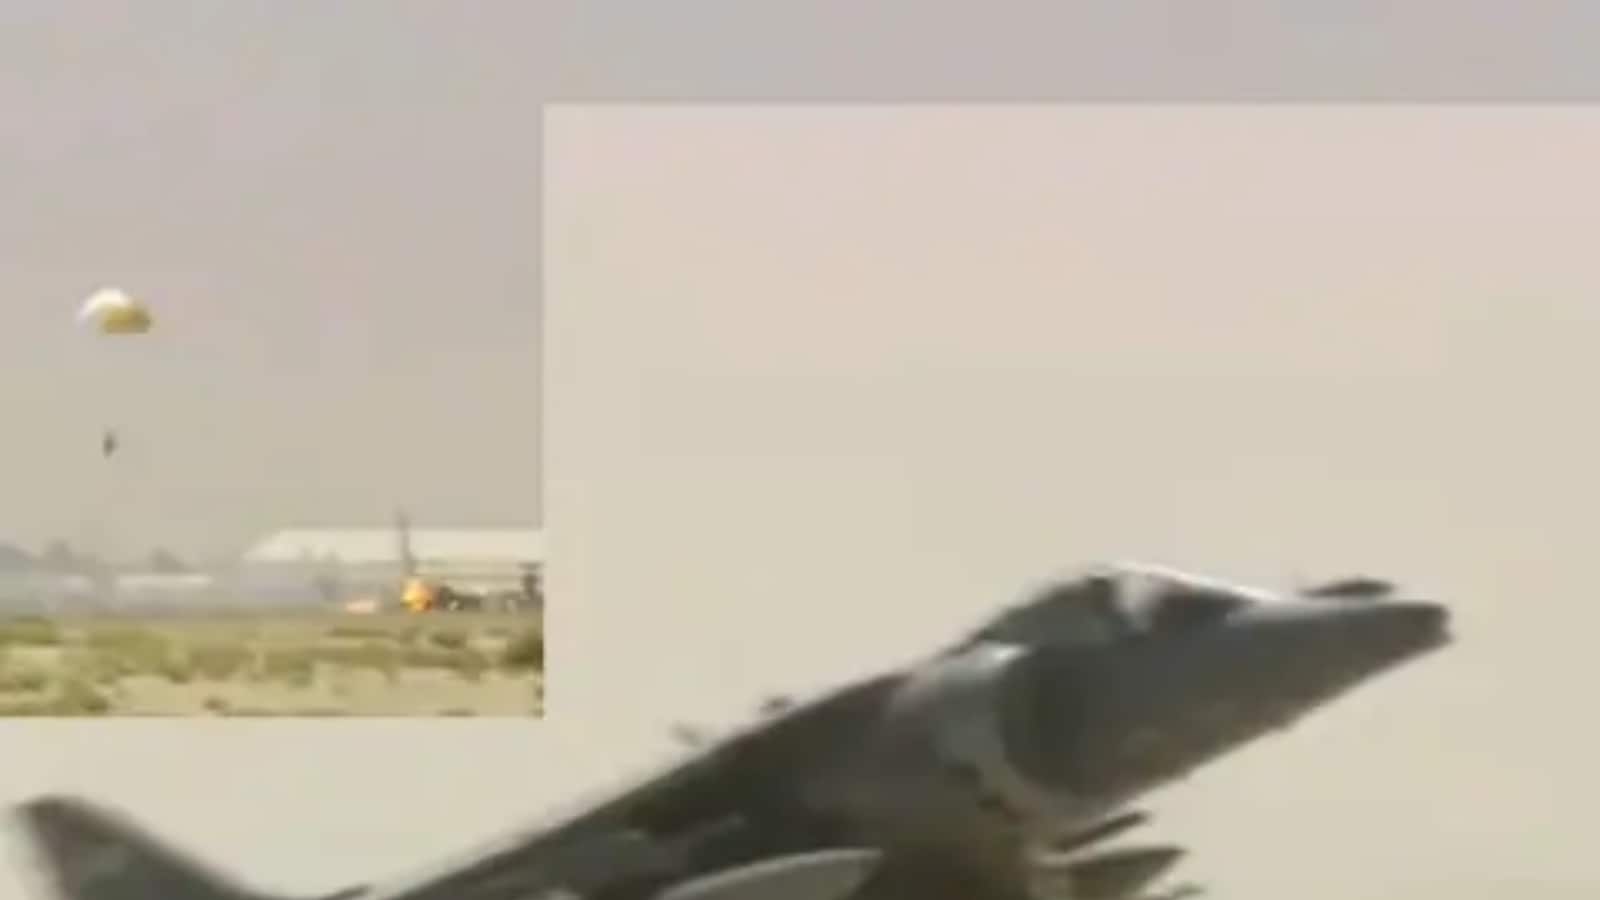 Watch: Pilot Ejects Seconds Before Plane Crash, Reddit Users Can't Believe It